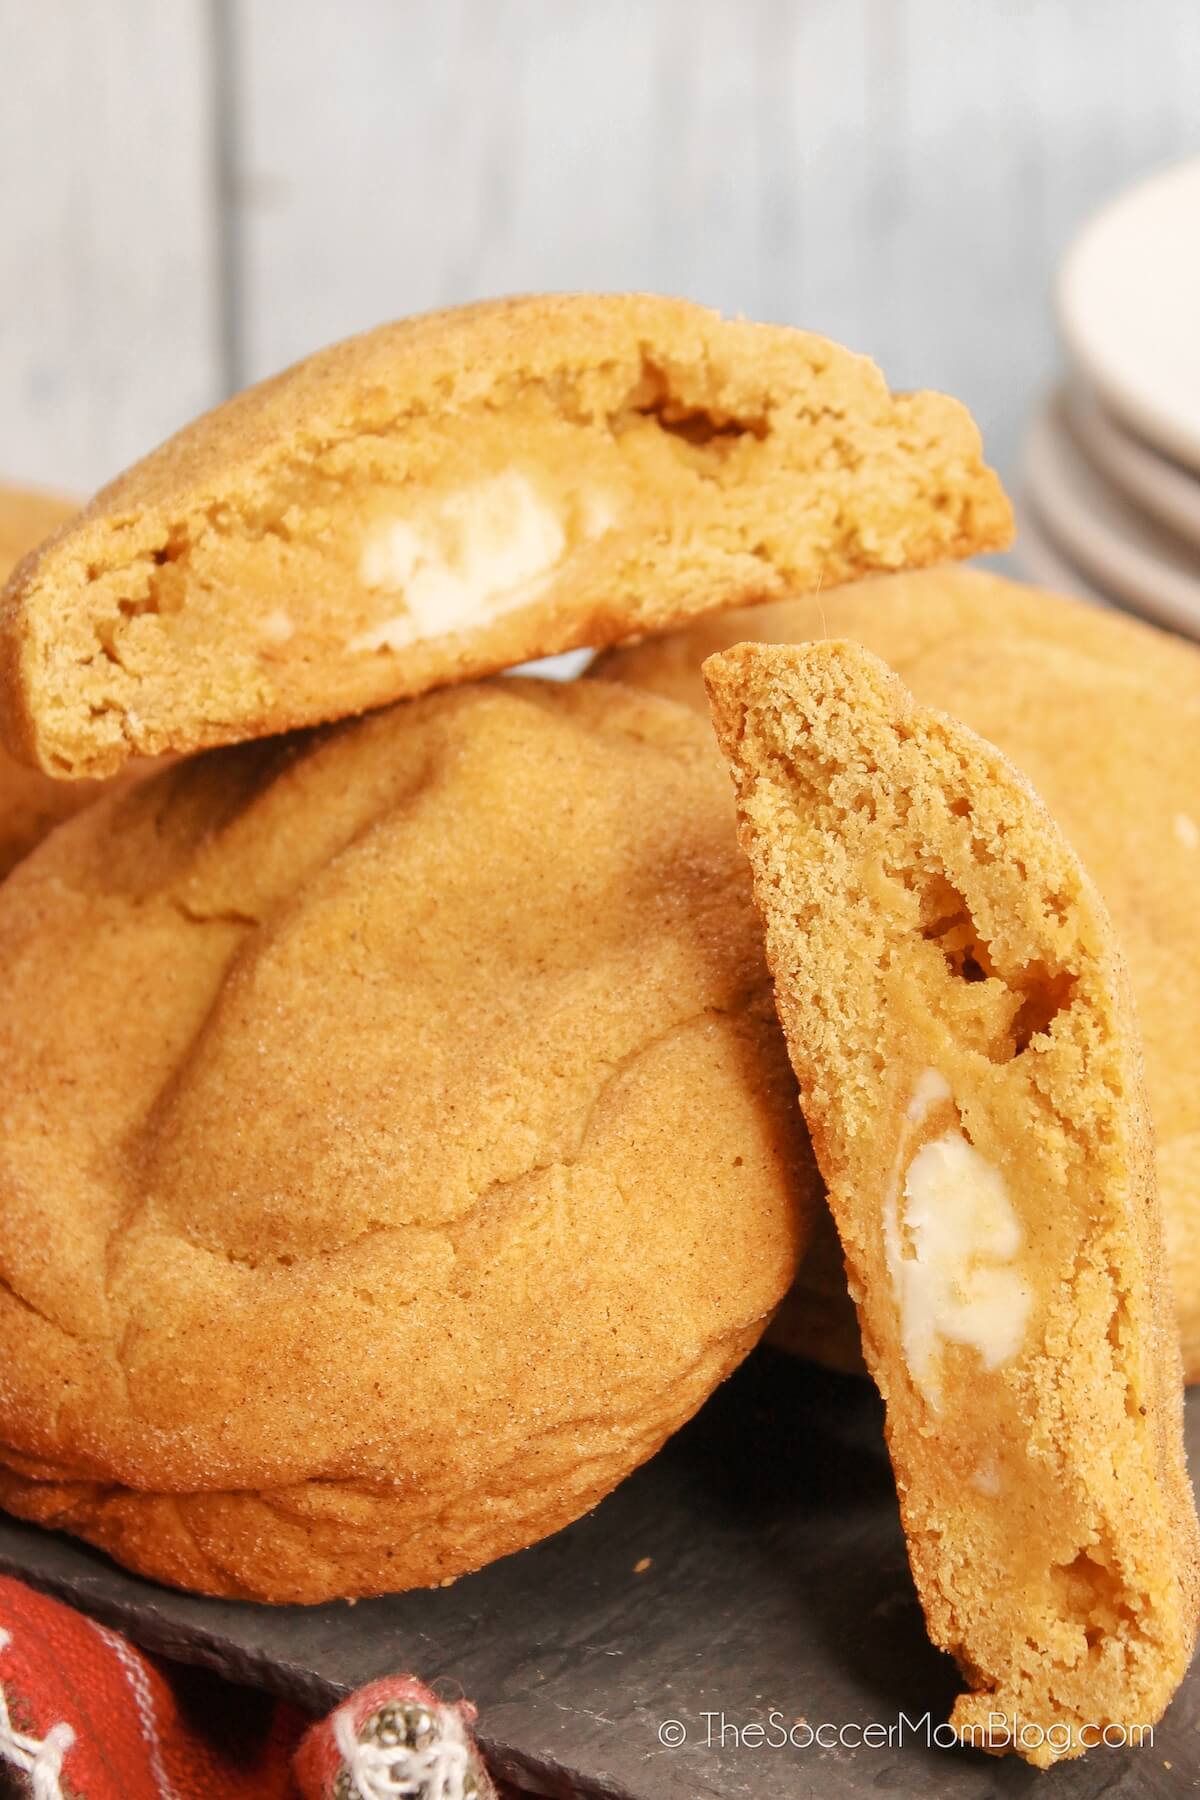 Pumpkin Cookies with one cut in half to show cheesecake filling, piled o serving plate